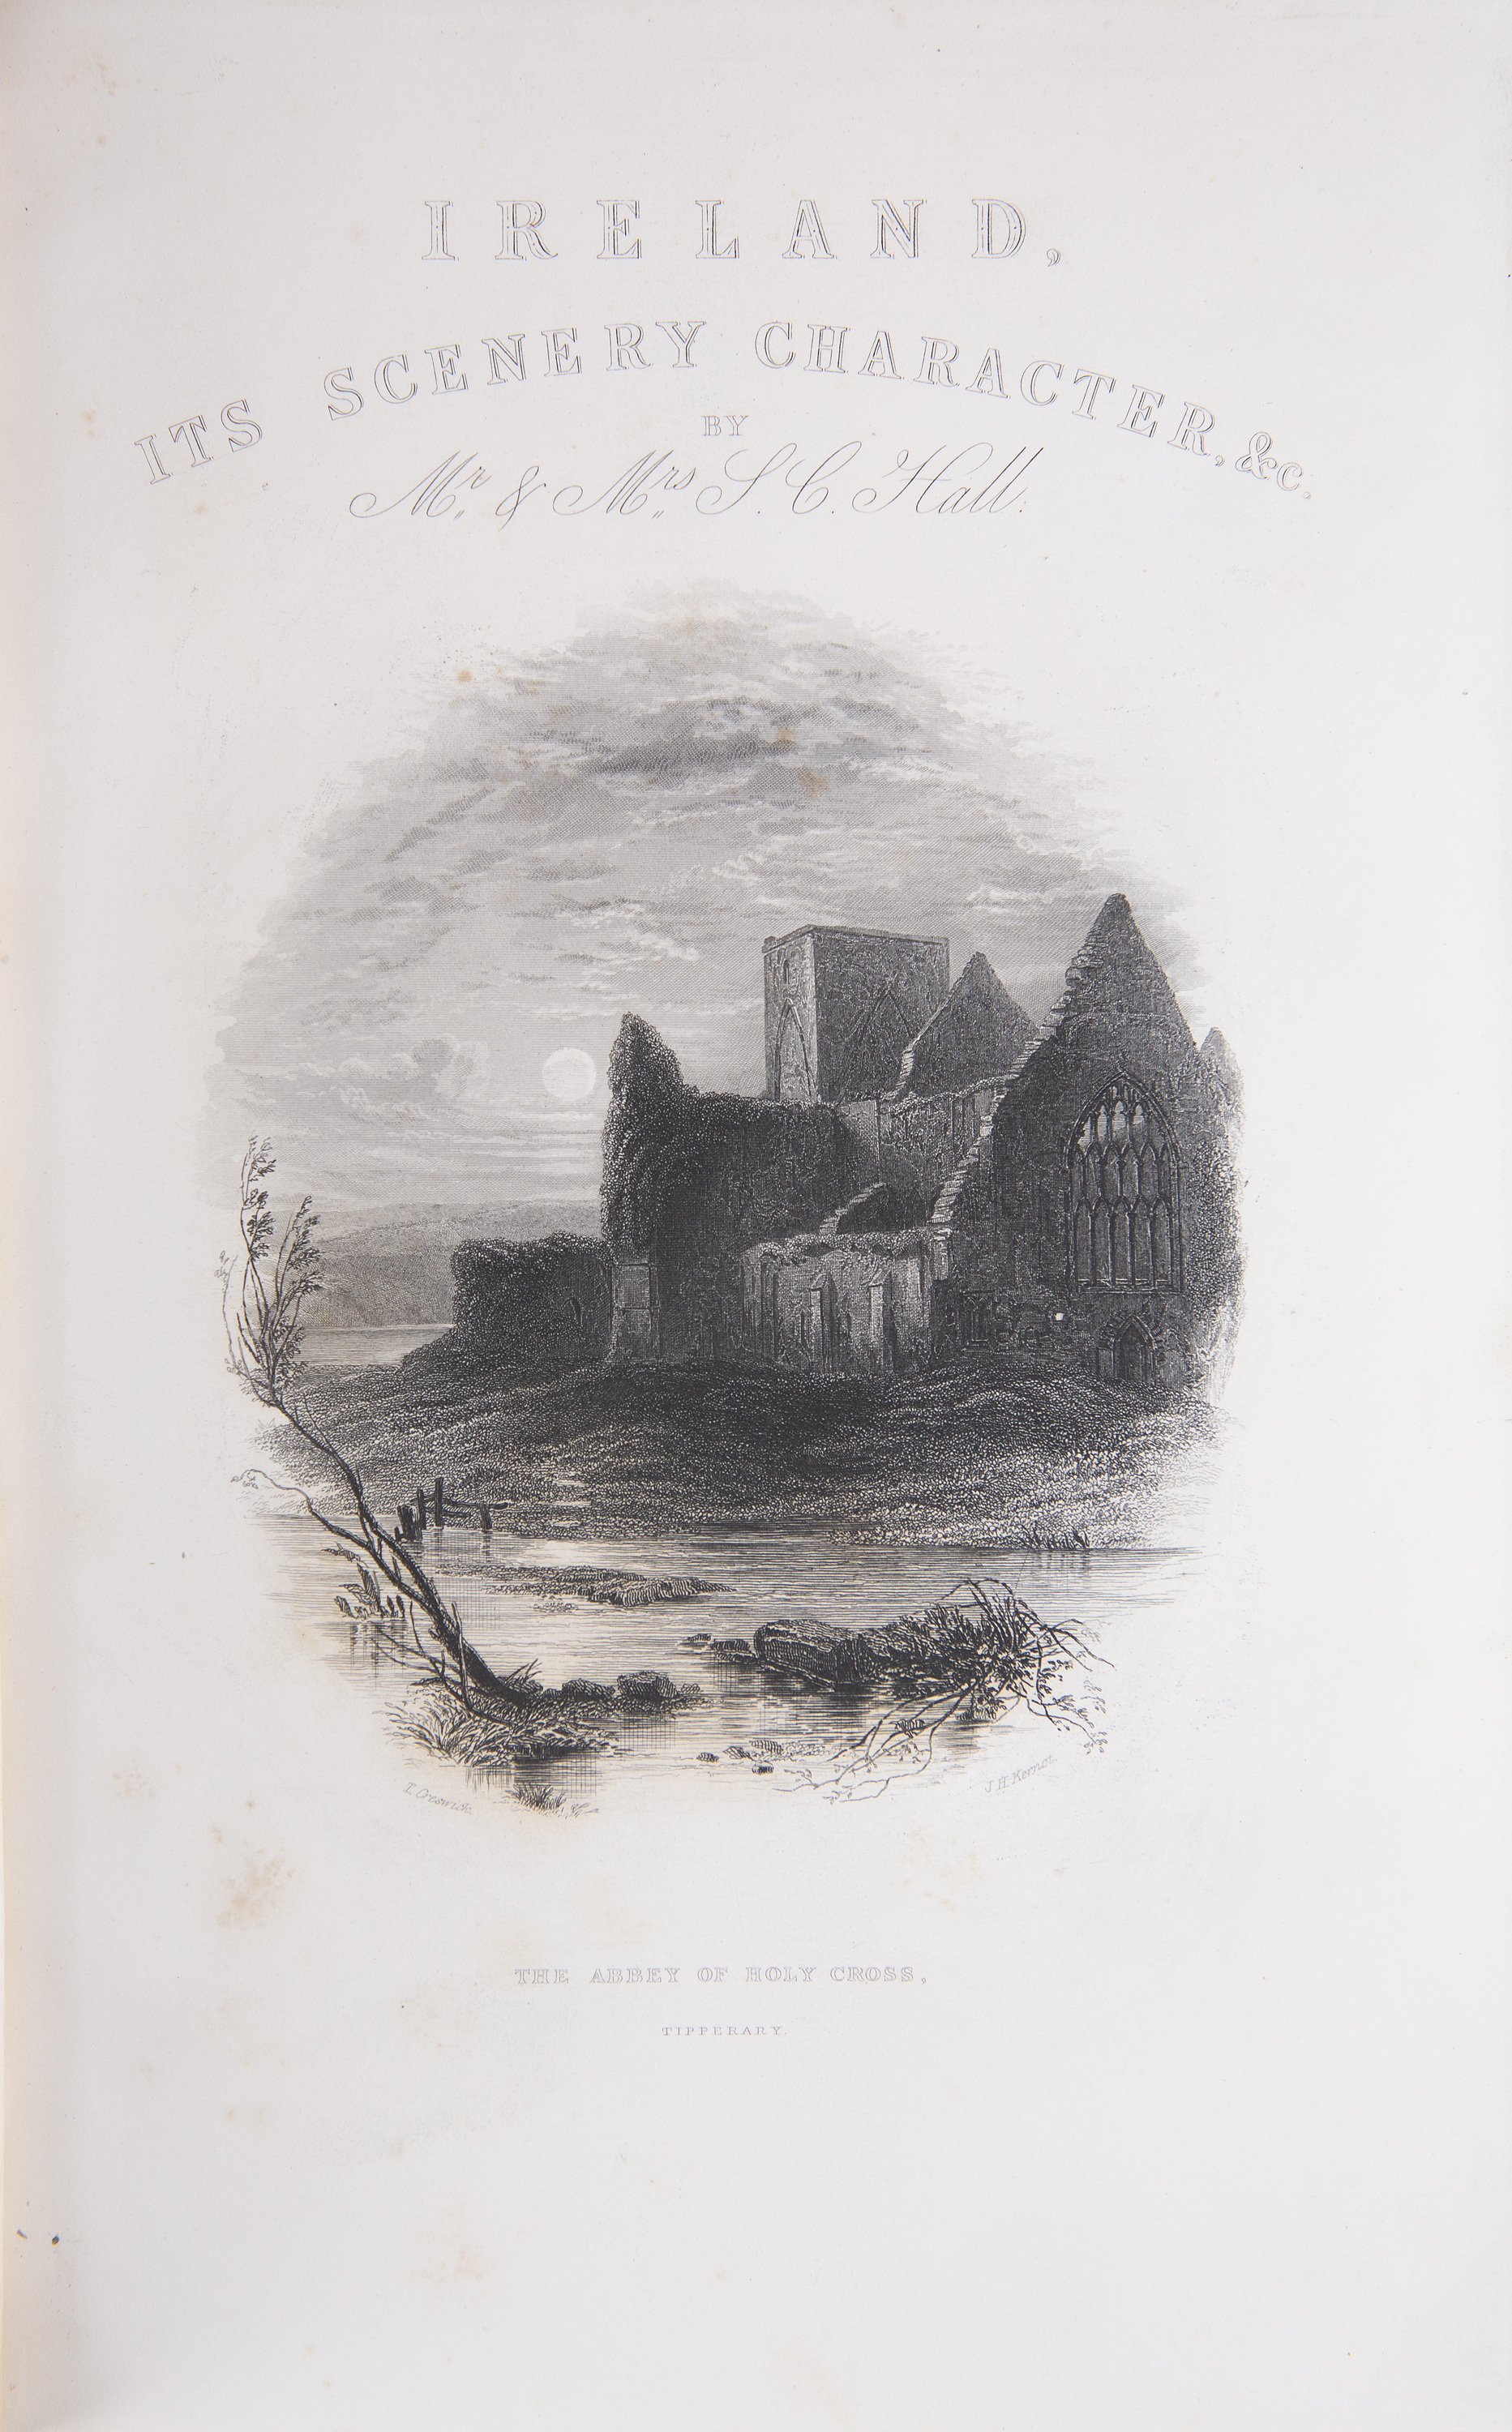 S.C.& A.M. HALL, IRELAND: ITS SCENERY AND CHARACTER Three volumes, with brown decorated cloth